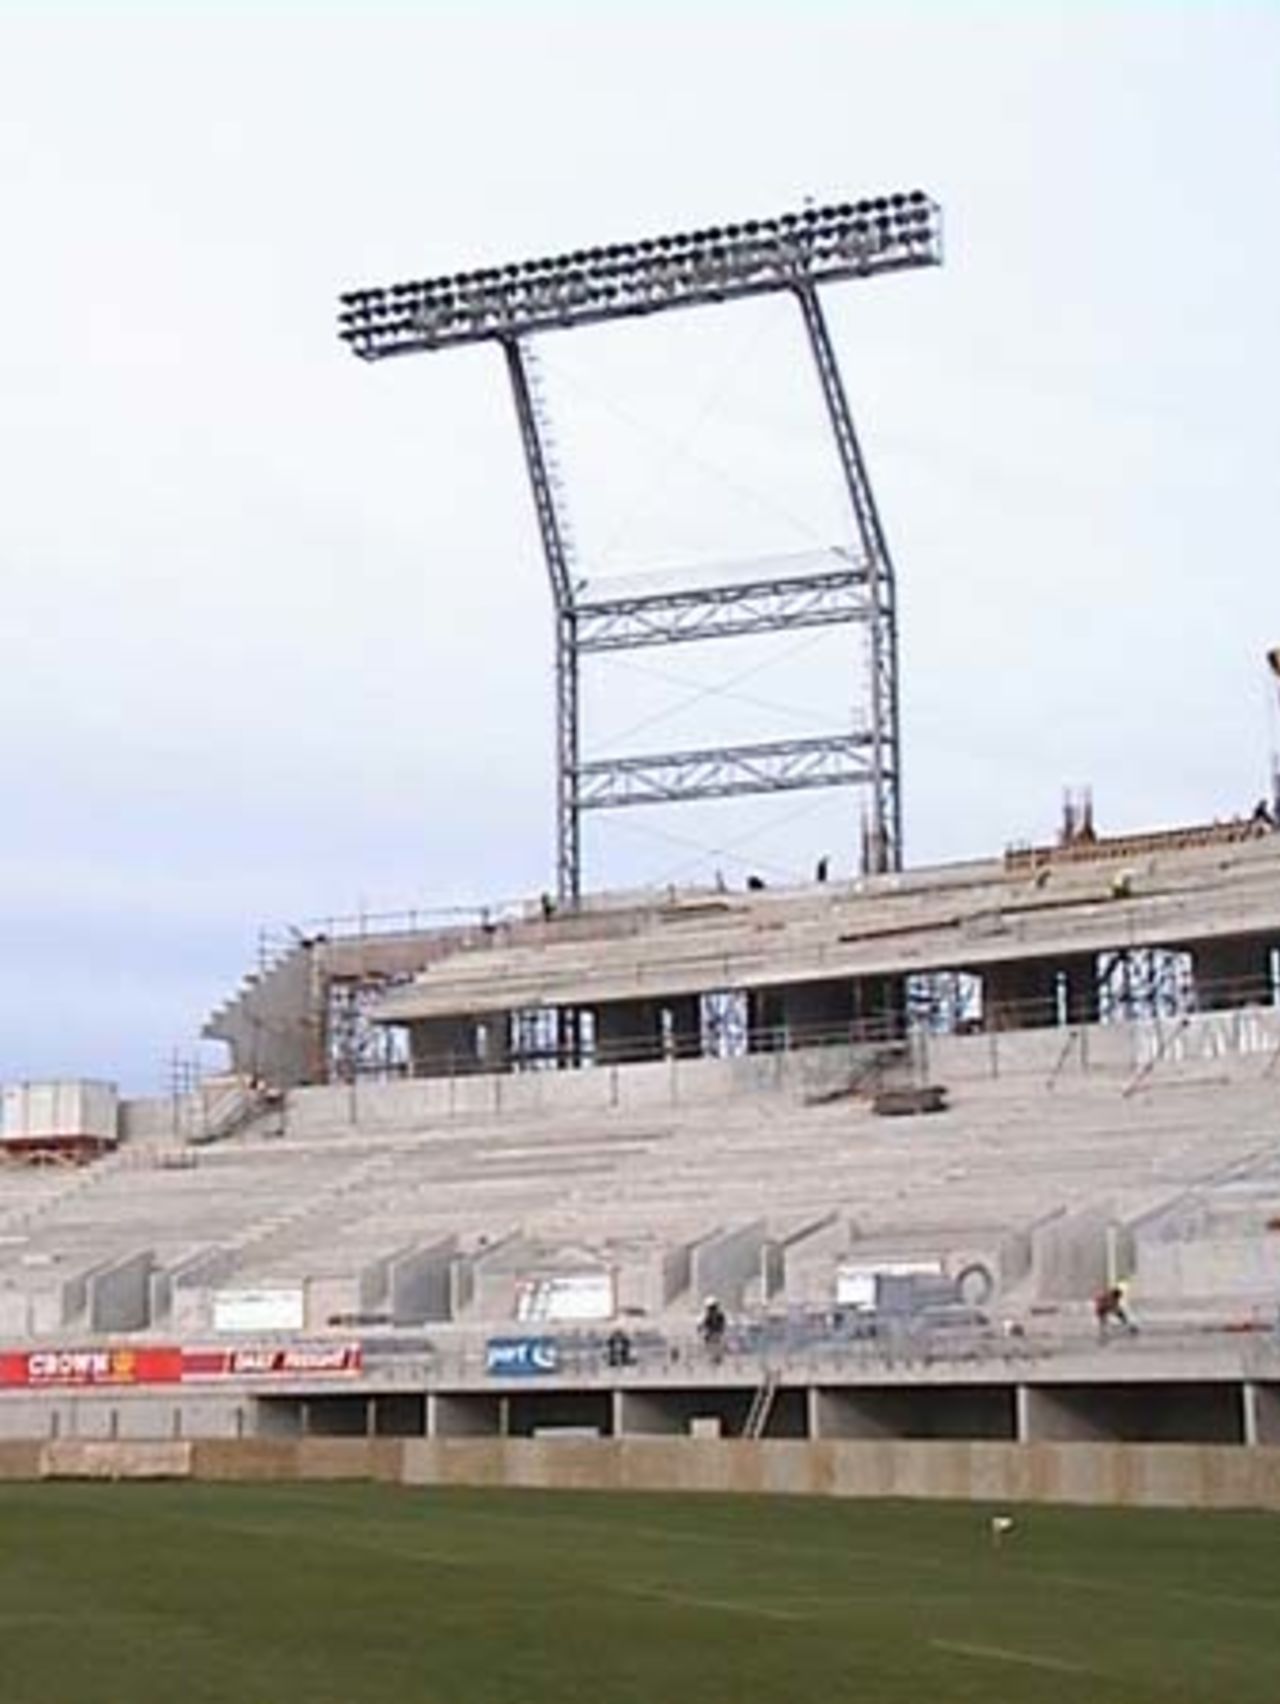 A view of part of the new stand during construction to replace the embankment at Jade Stadium, 23 August 2001.